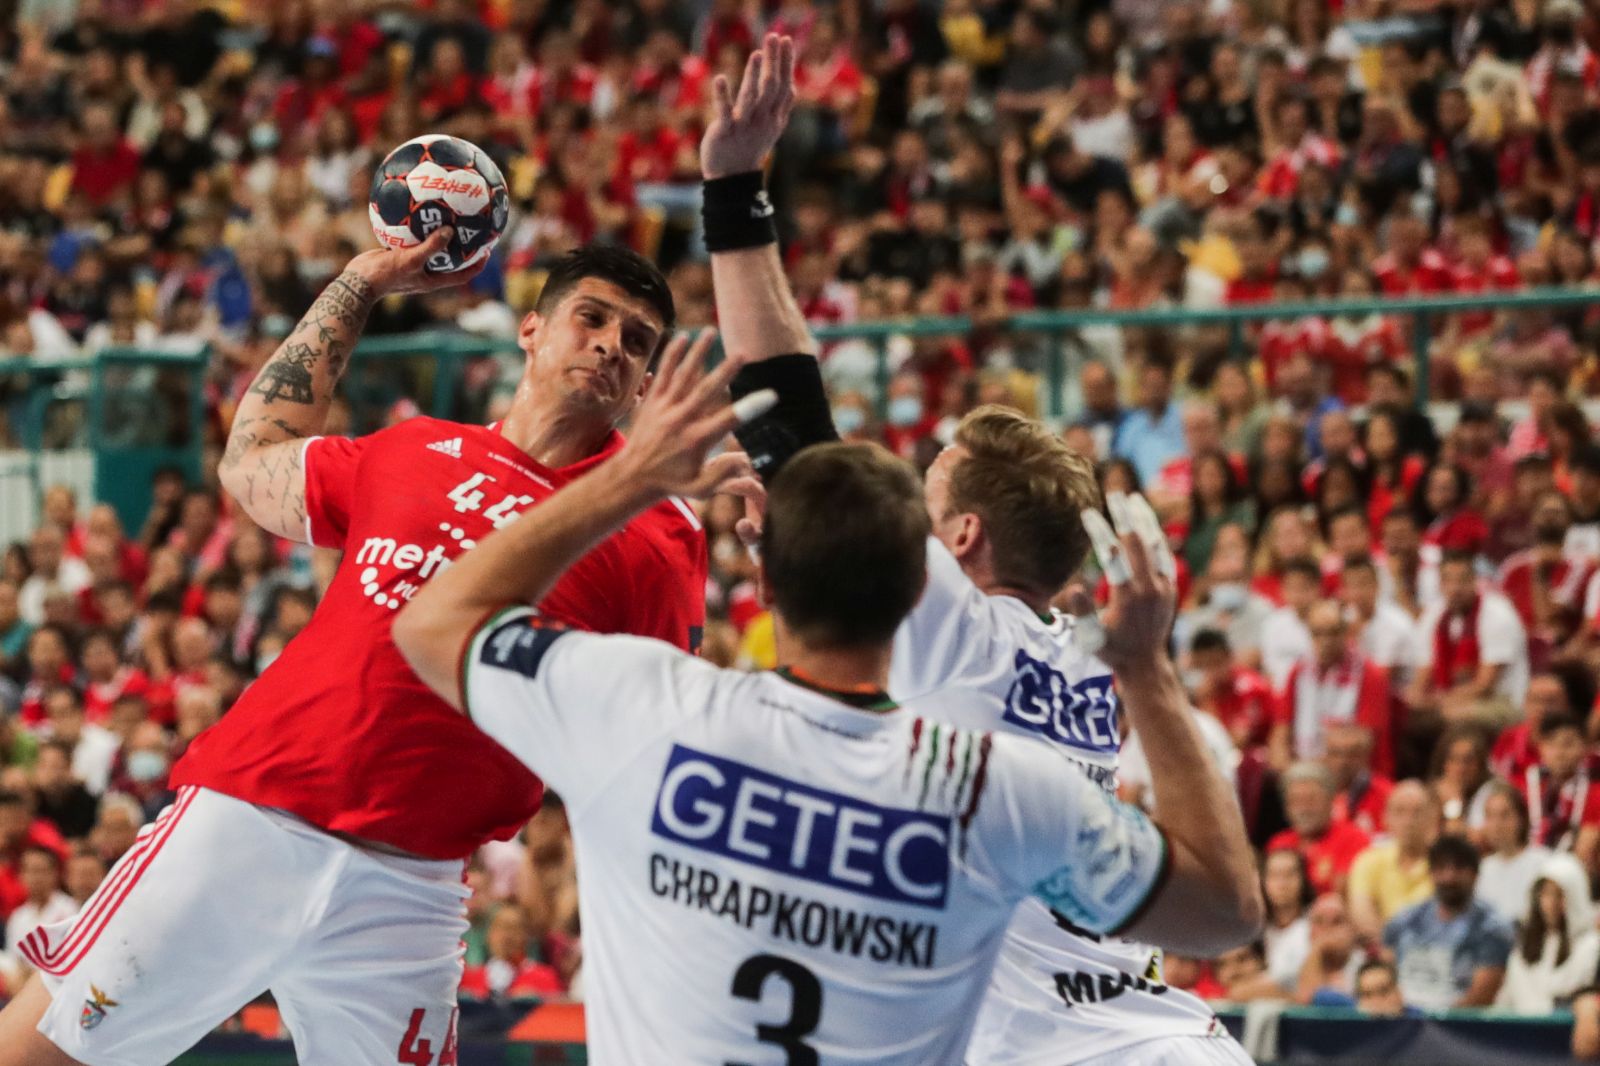 epa09985007 Benfica's Petar Djordjic (L) fights for the ball with Magdeburg's Piotr Chrapkowski (C) during the EHF European League final handball match SL Benfica vs SC Magdeburg at the Altice Arena in Lisbon, Portugal, 29 May 2022.  EPA/TIAGO PETINGA